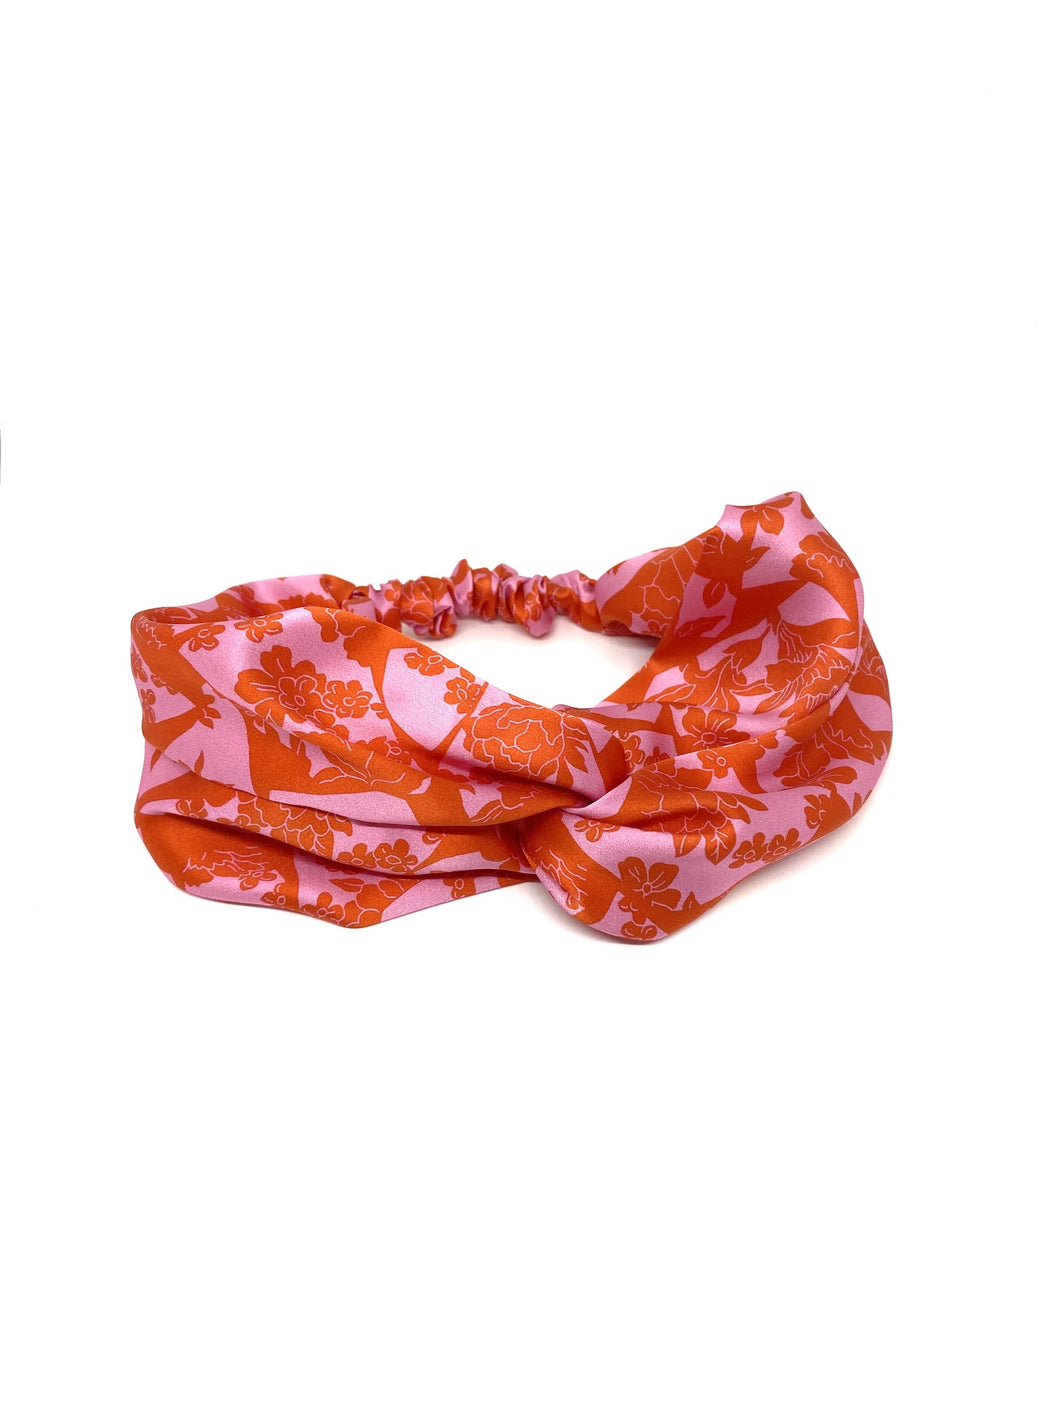 Luxurious pink and red silk Liberty knot  head band